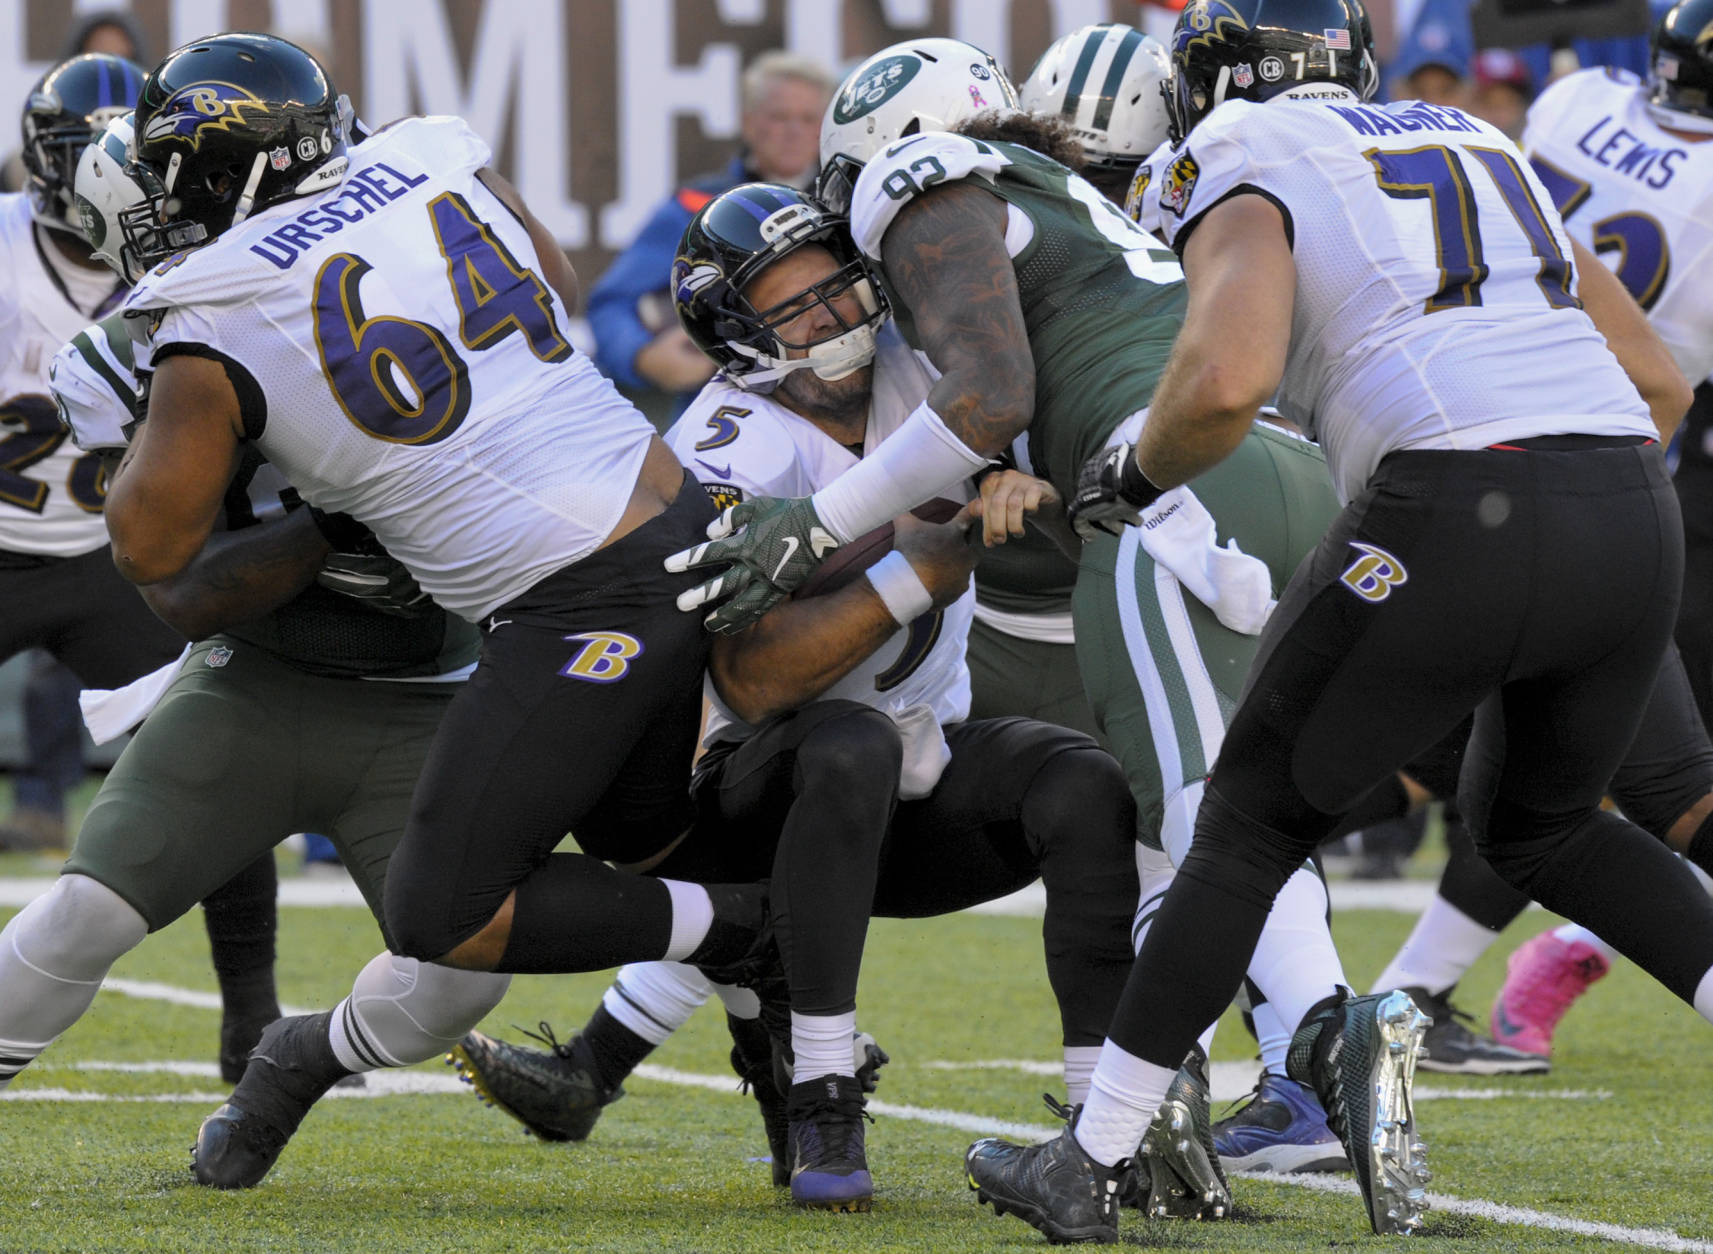 (Photo Credit:AP Photo/Bill Kostroun) The Jets defense put pressure on Flacco all afternoon.